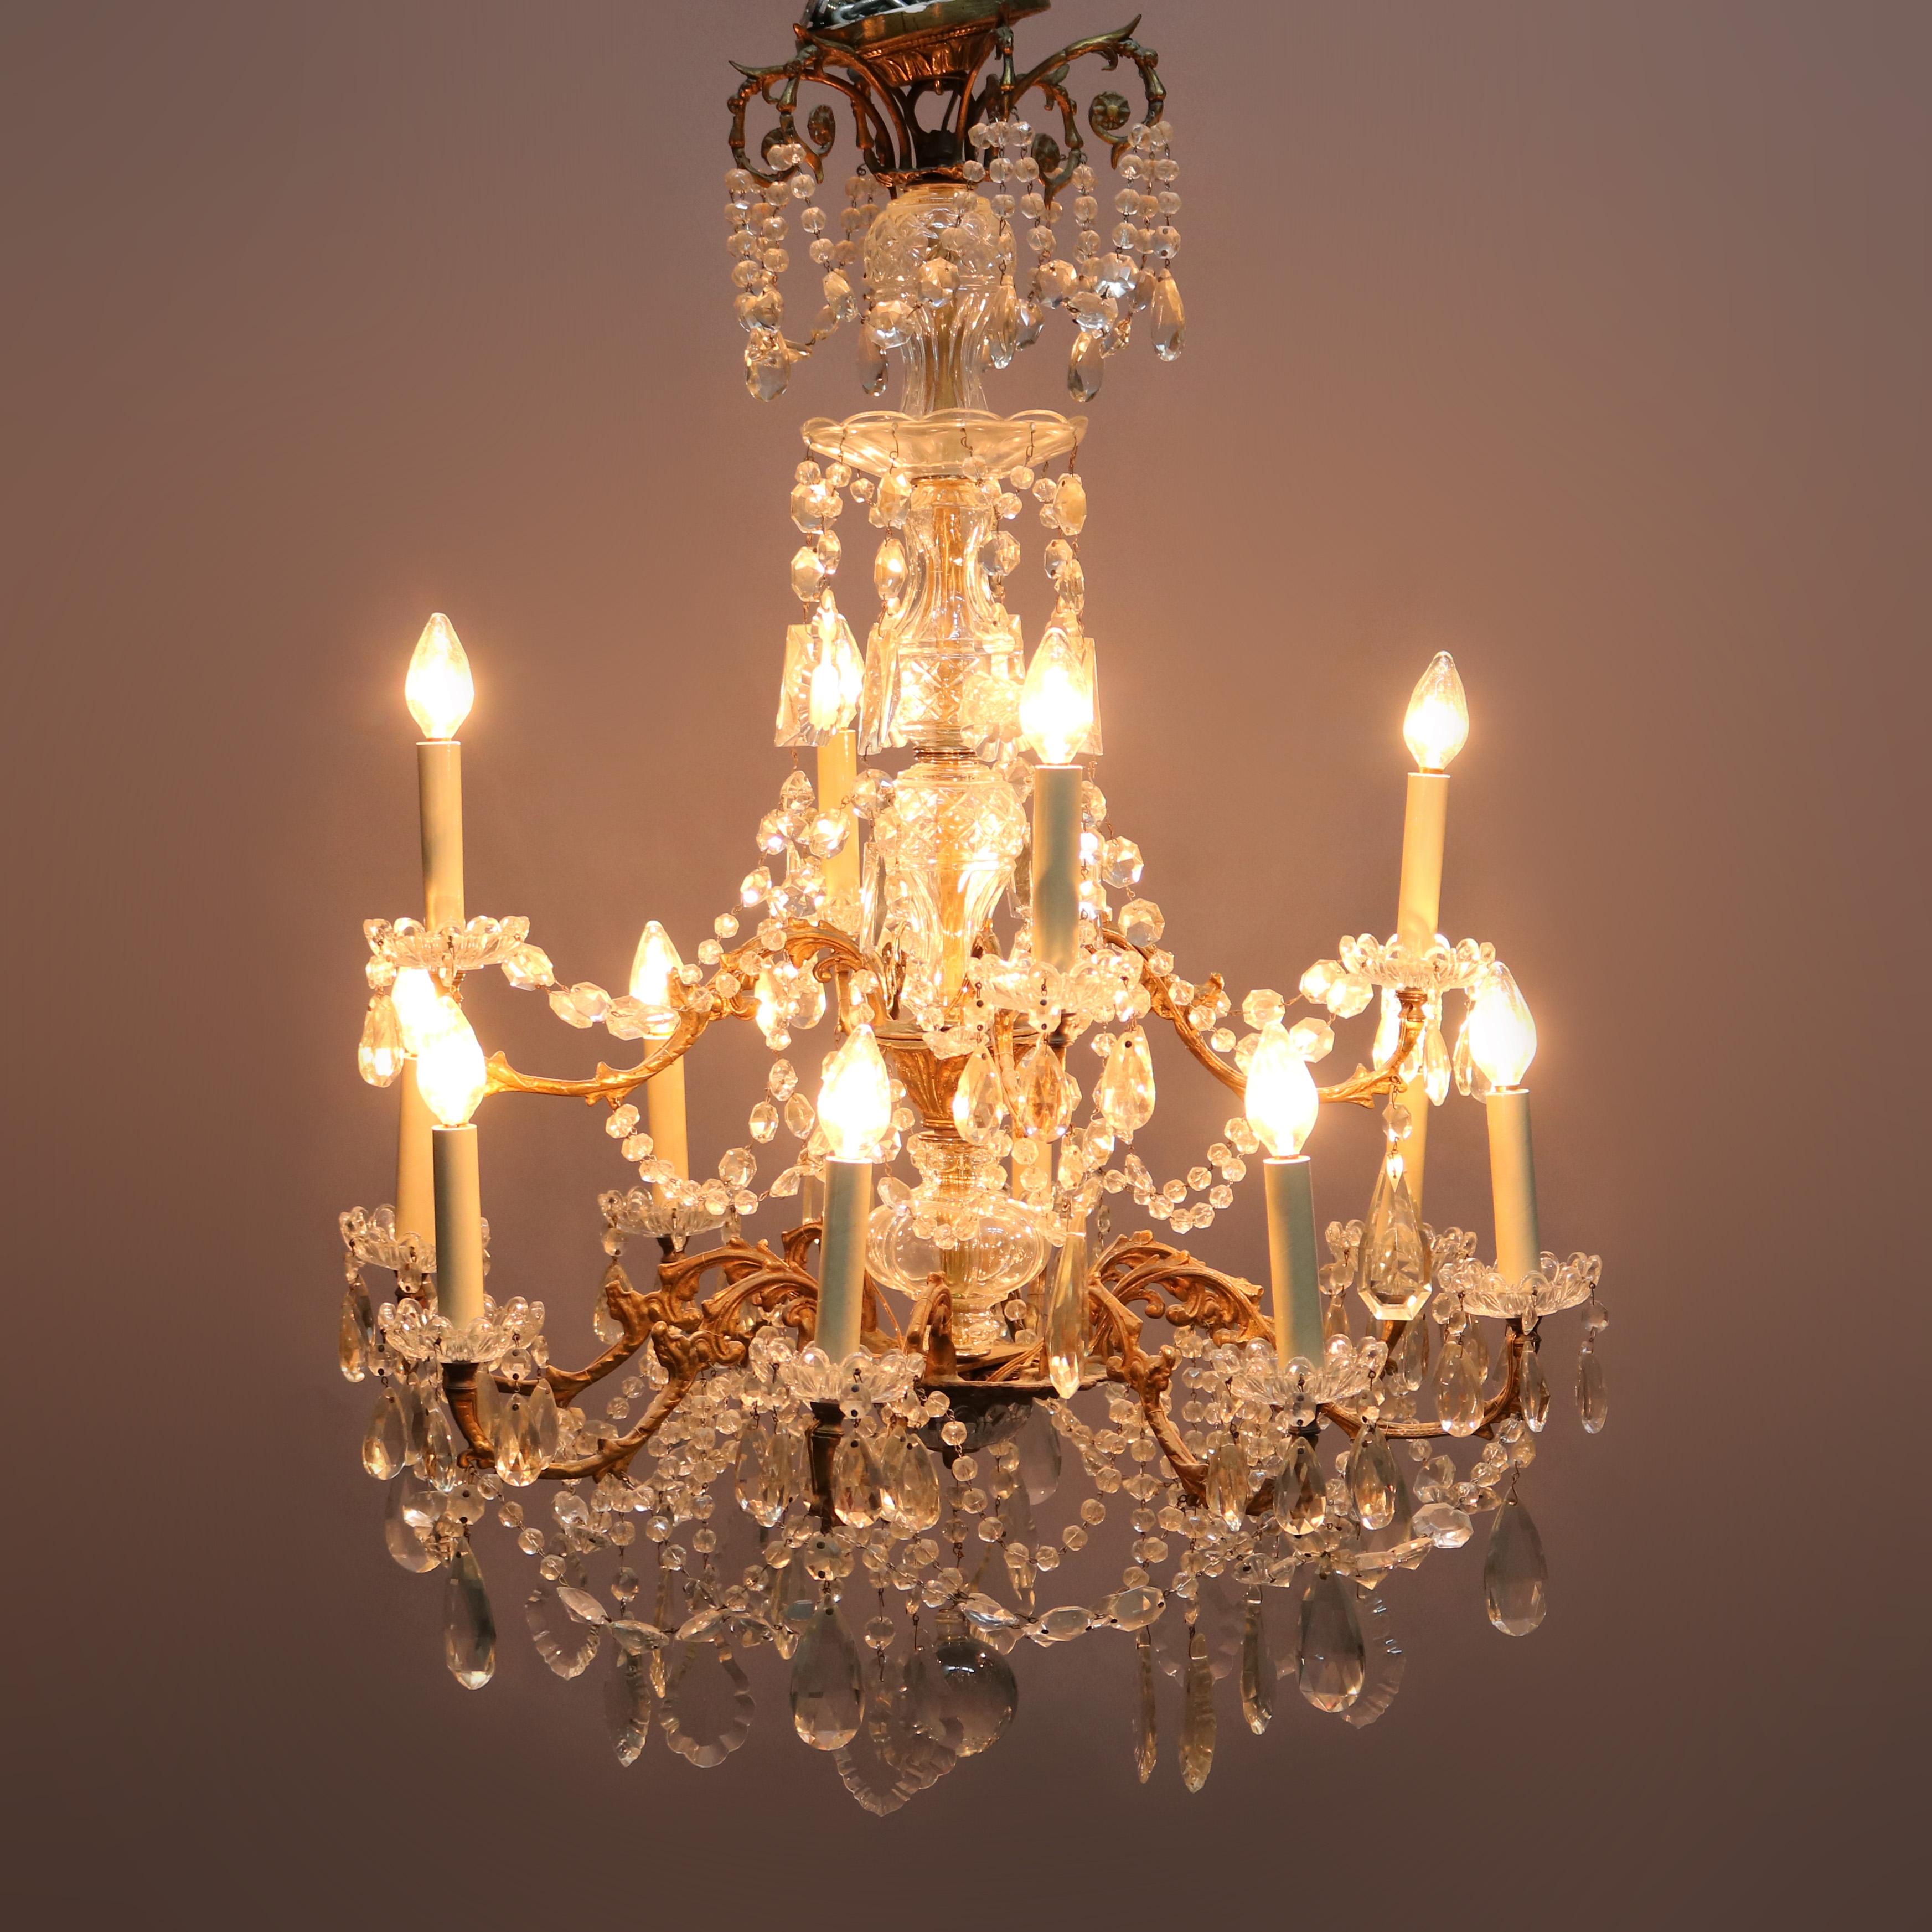 Cast Antique French Bronze and Crystal Twelve-Light Chandelier, circa 1920